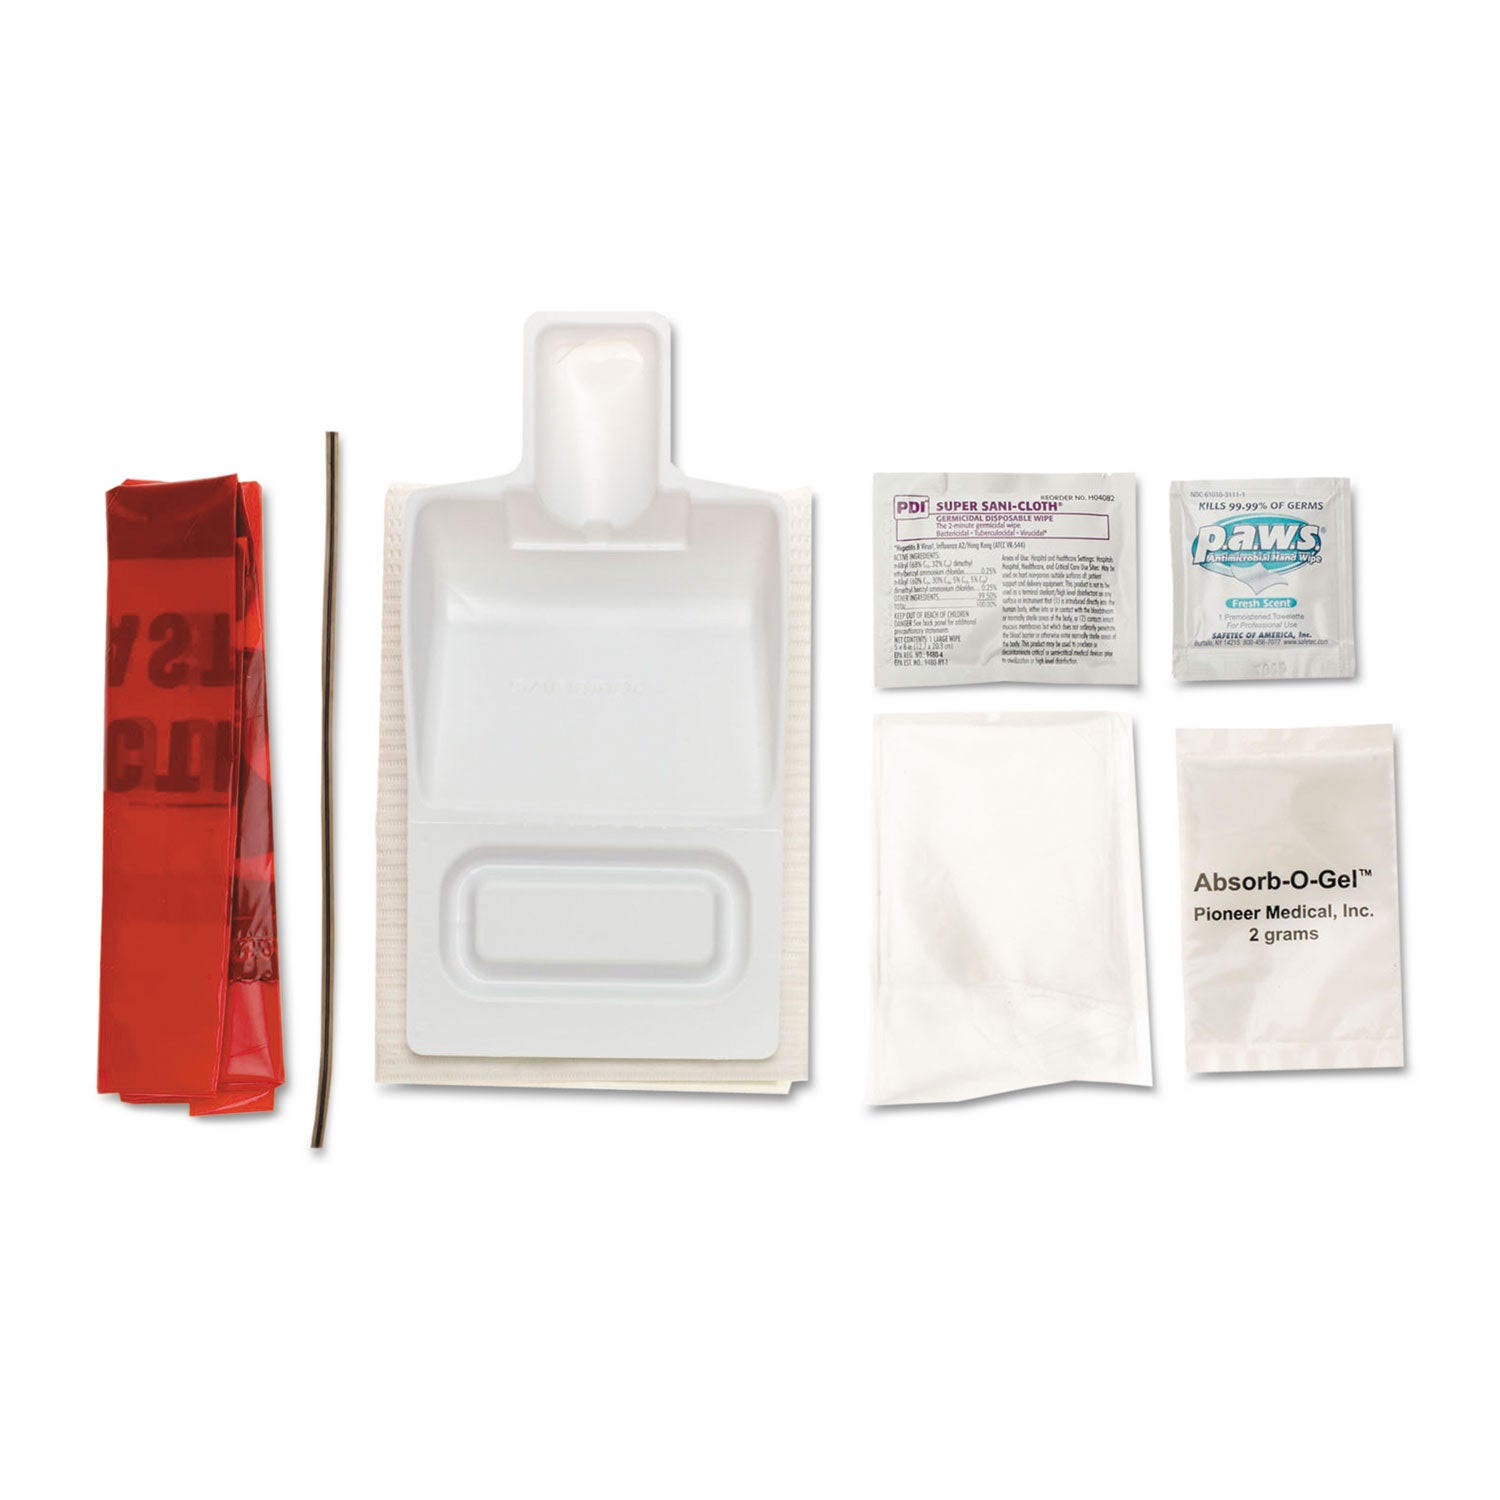 Biohazard Fluid Clean-Up Kit, 10.3 x 1.6 x 10.5, 7 Pieces, Synthetic-Fabric Bag - 